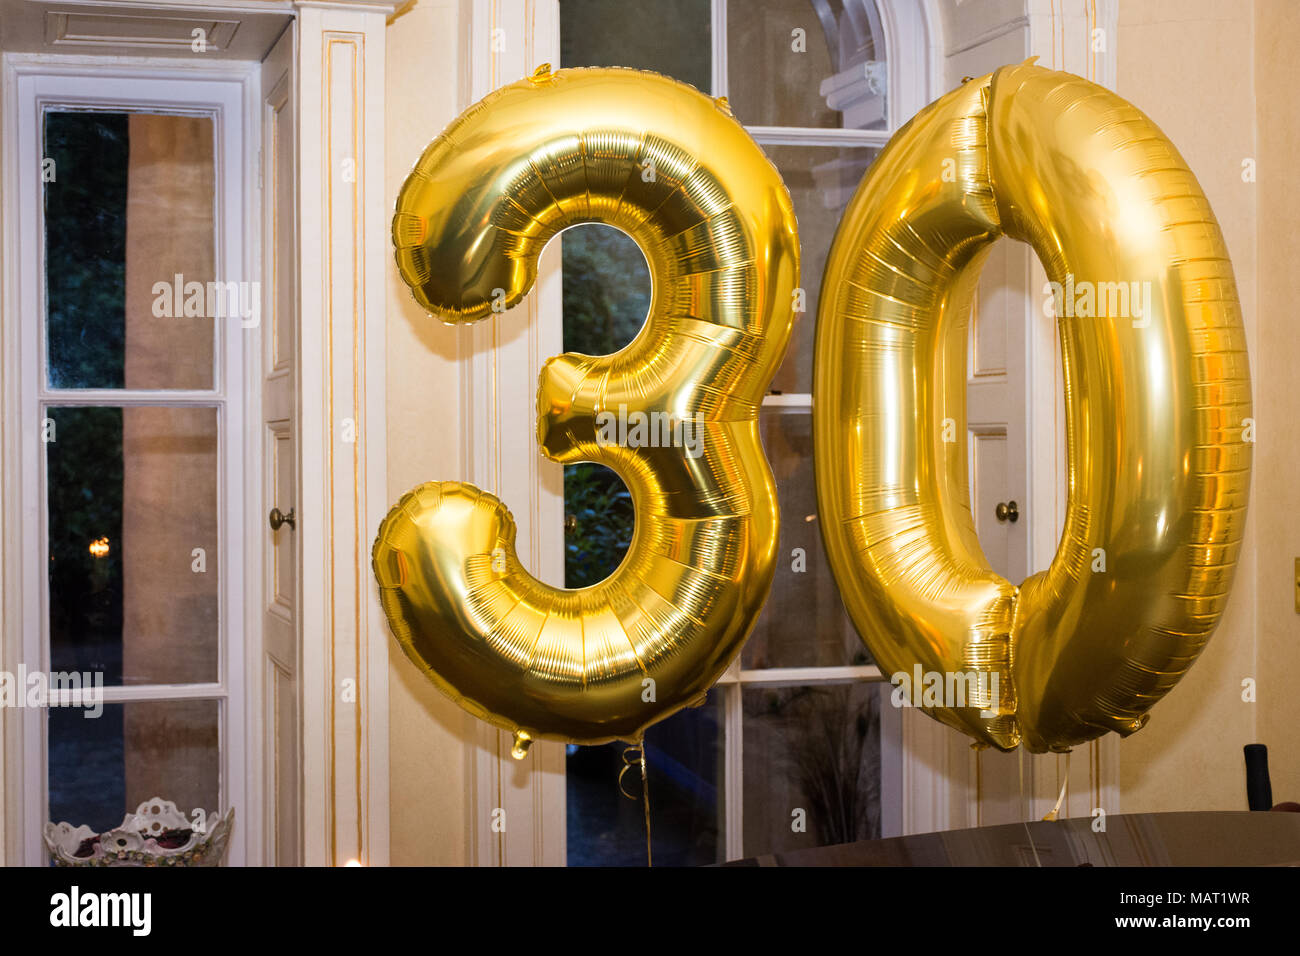 the number balloons